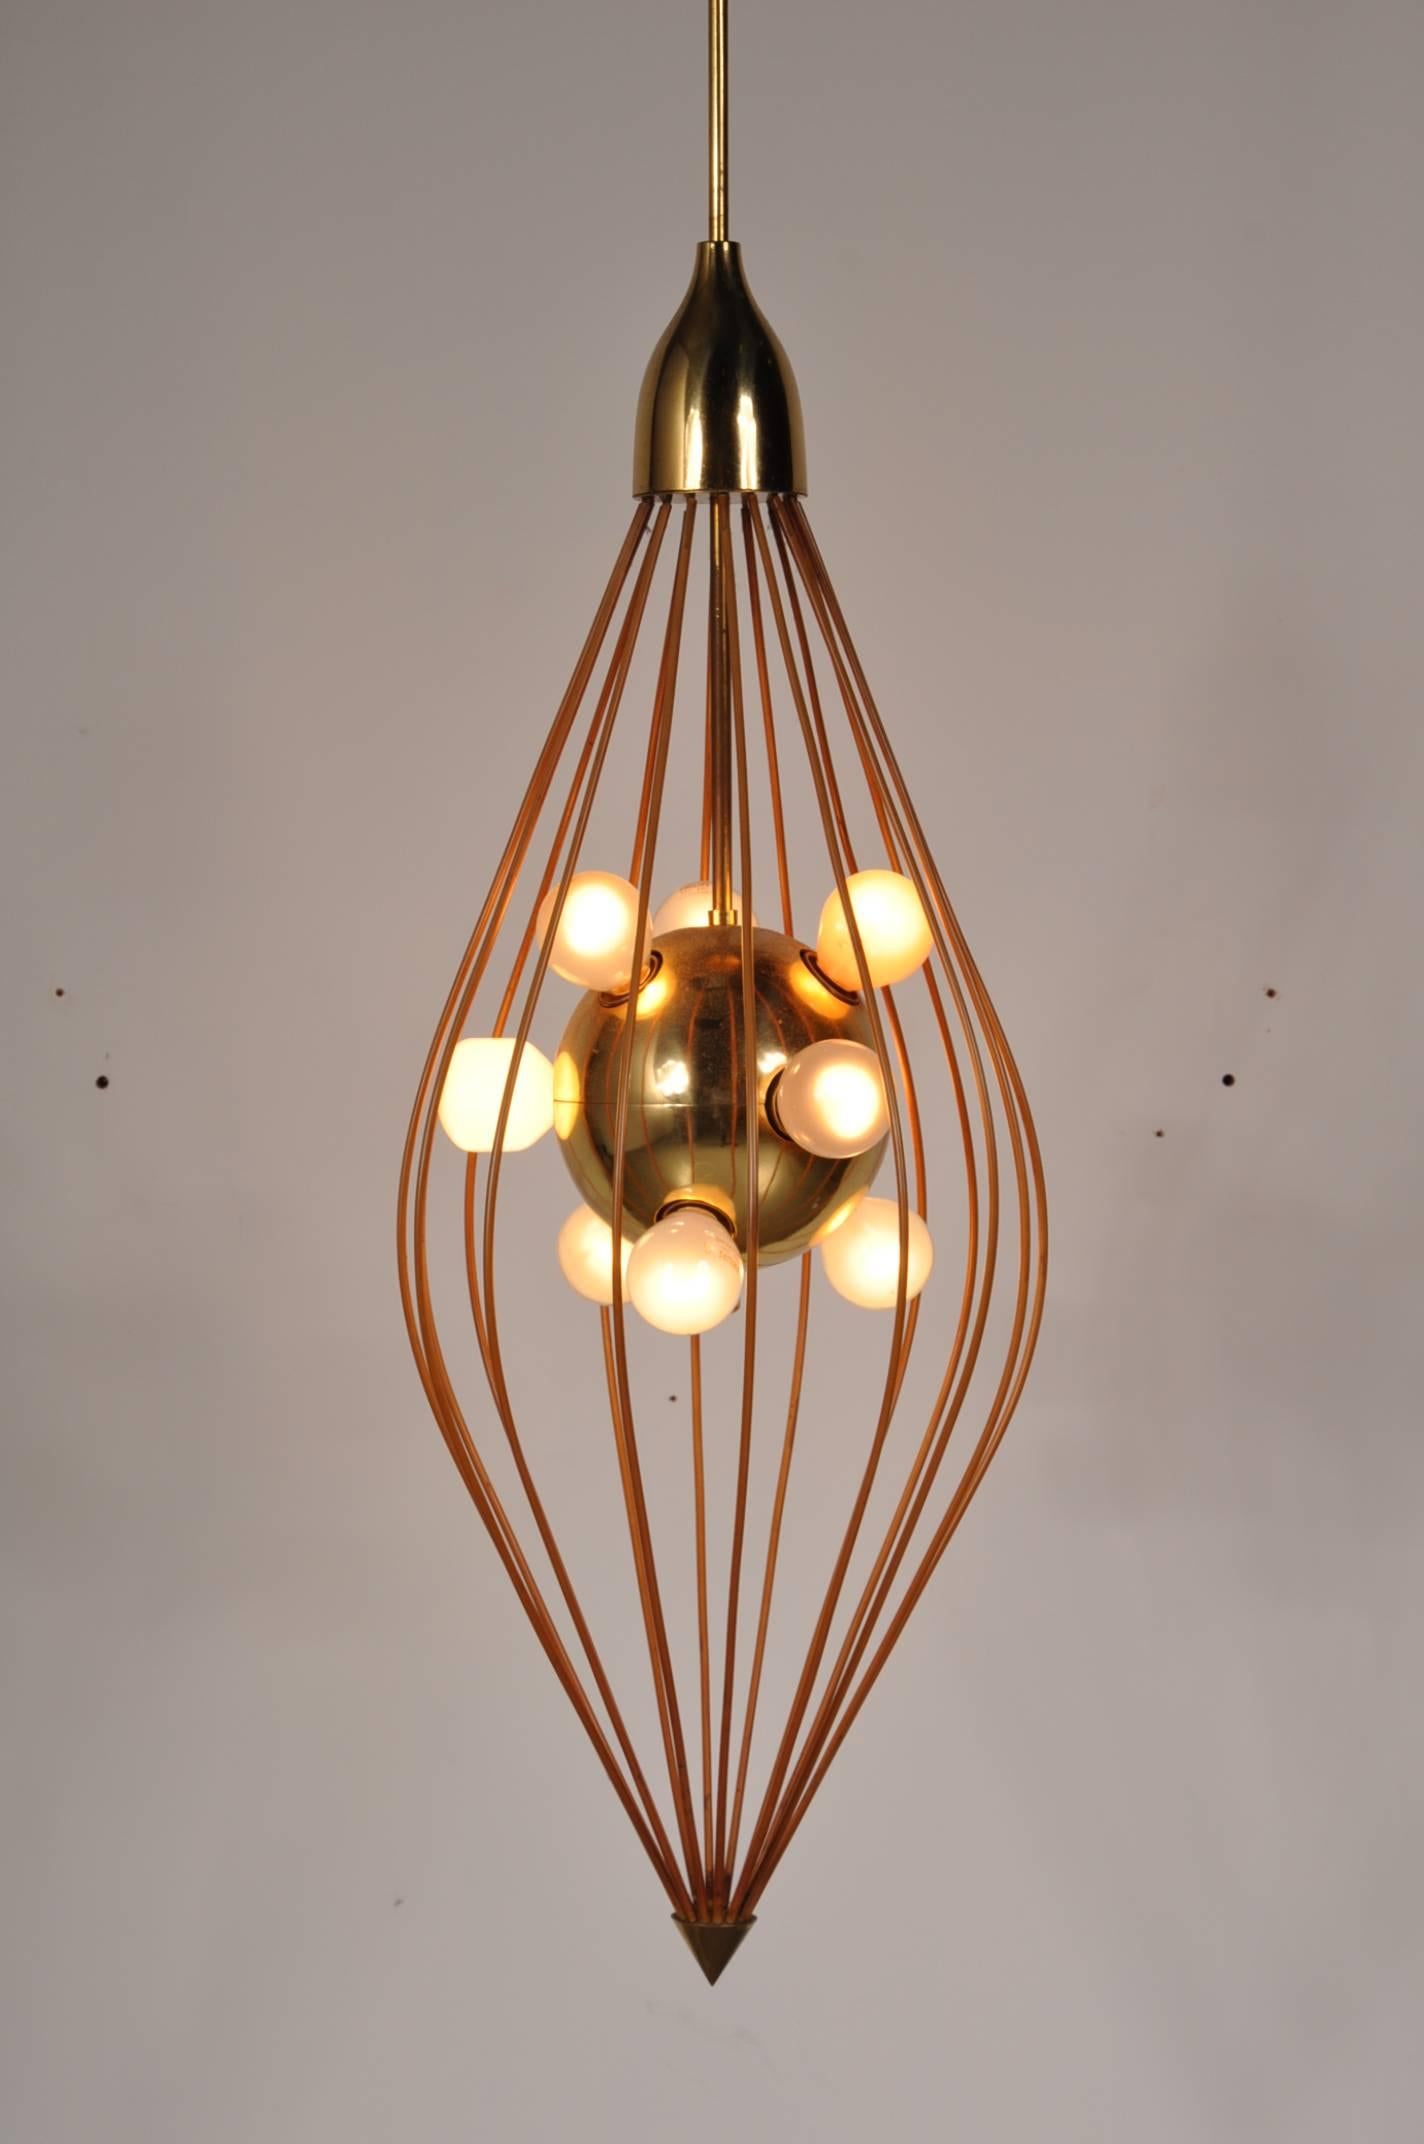 Stunning ceiling lamp in the style of Angelo Lelli / Arredoluce, manufactured in Italy, circa 1950.

The lamp is made of the highest quality brass. It is made of plastic covered metal rods in a diamond shape with several light bulbs in the middle.